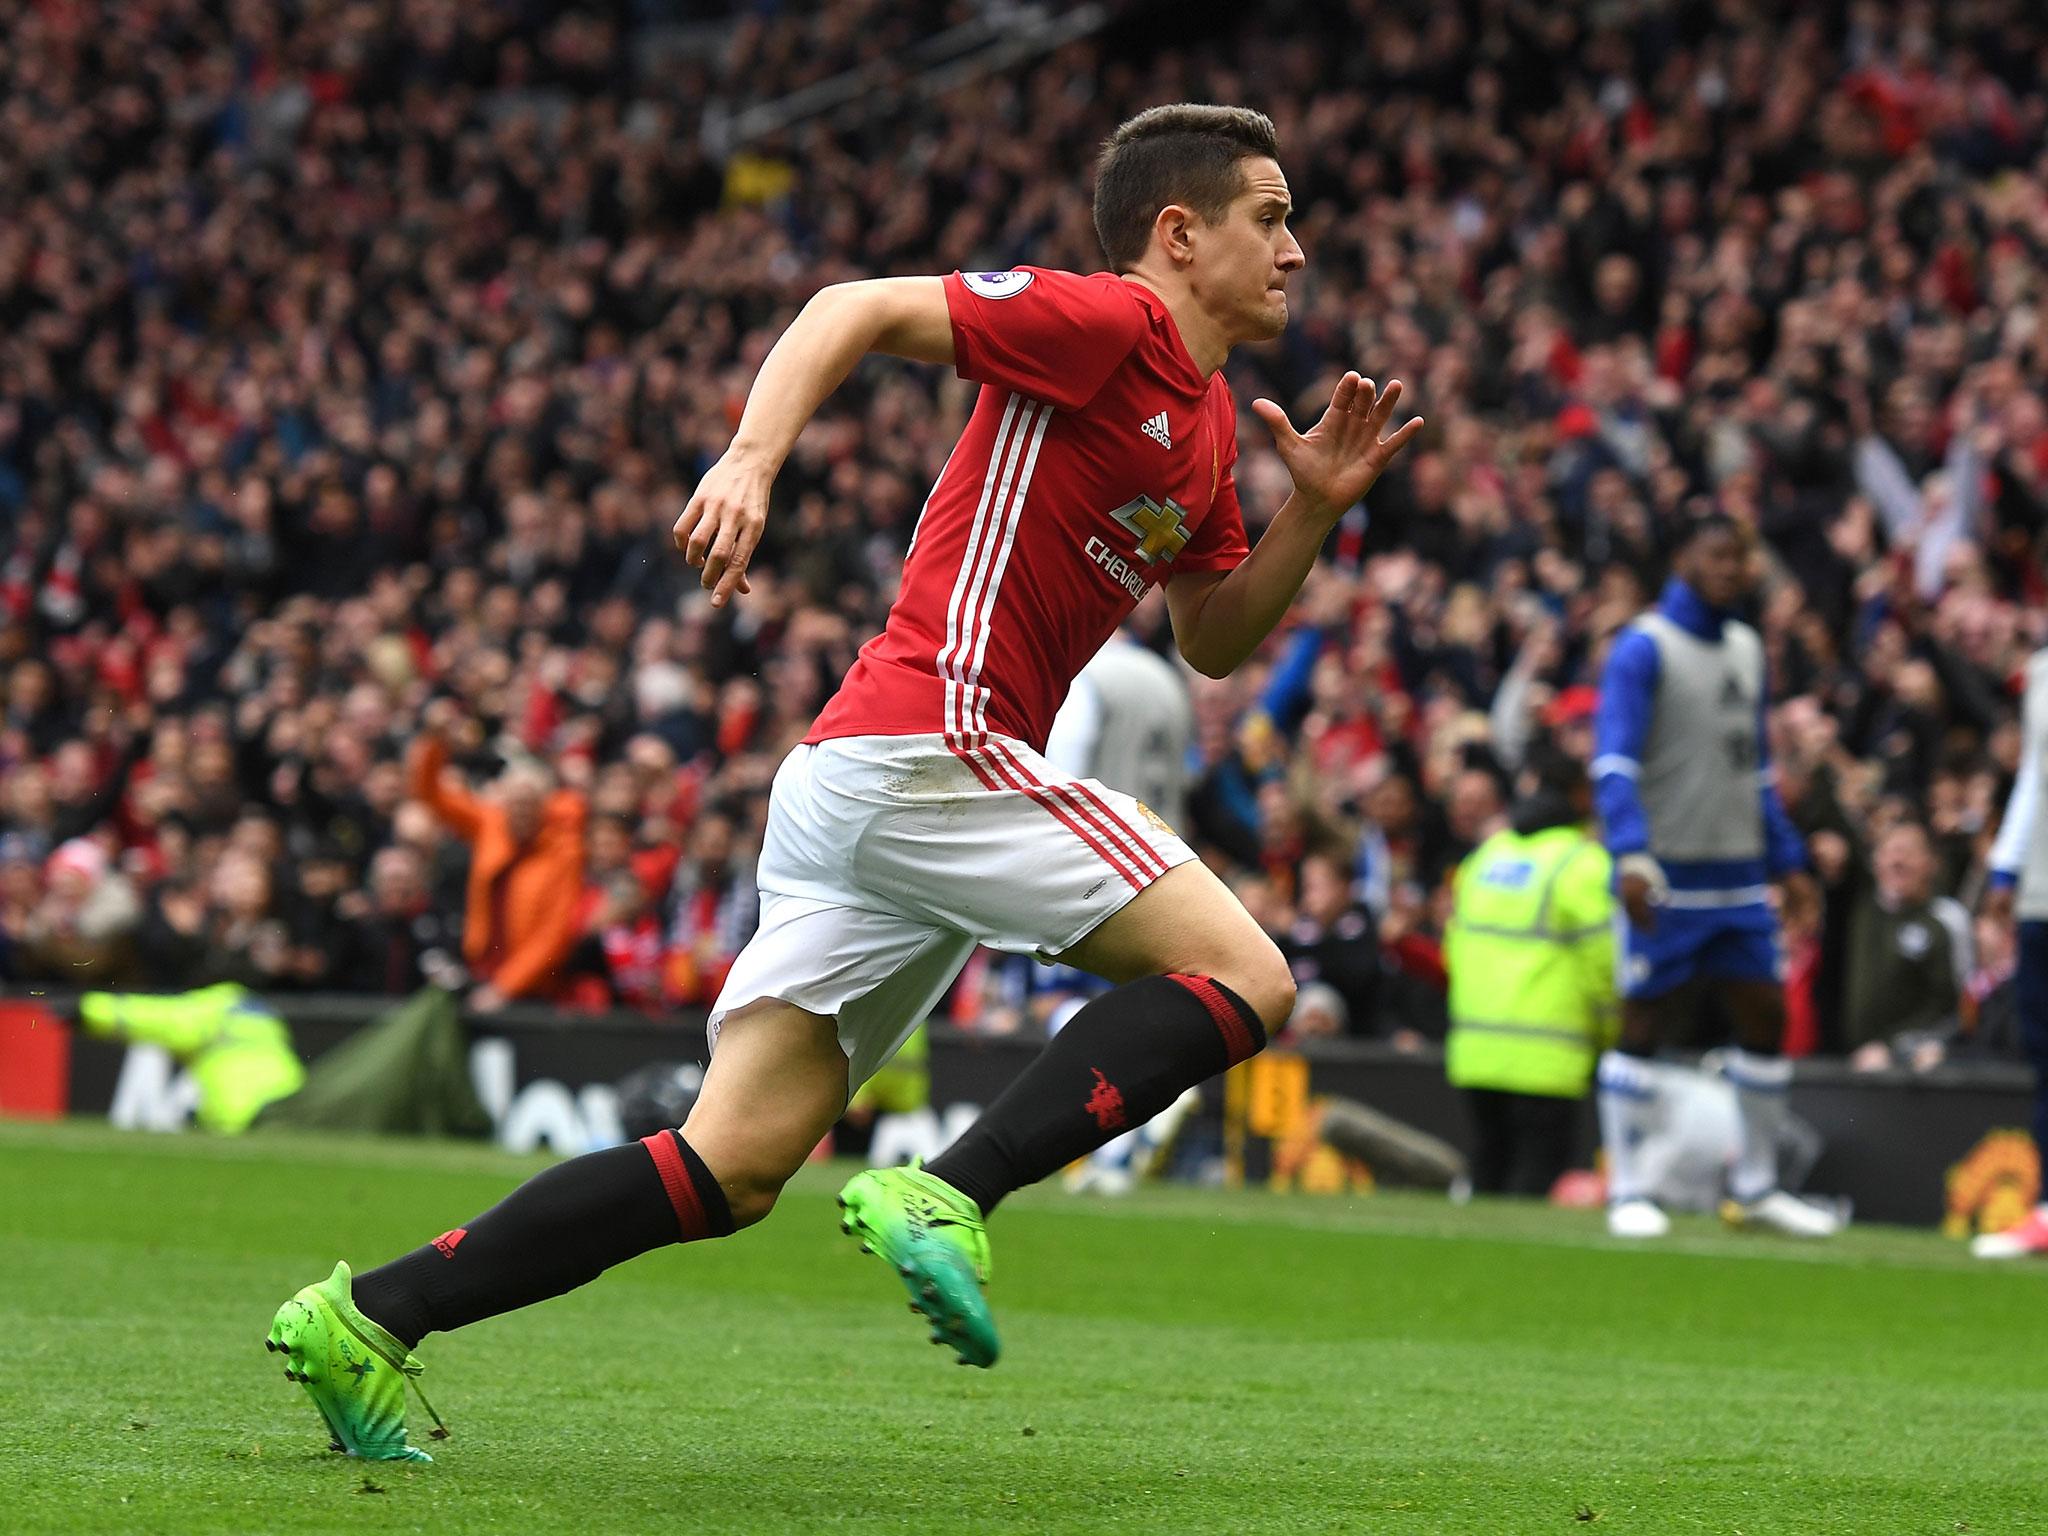 Herrera's goal and assist proved crucial